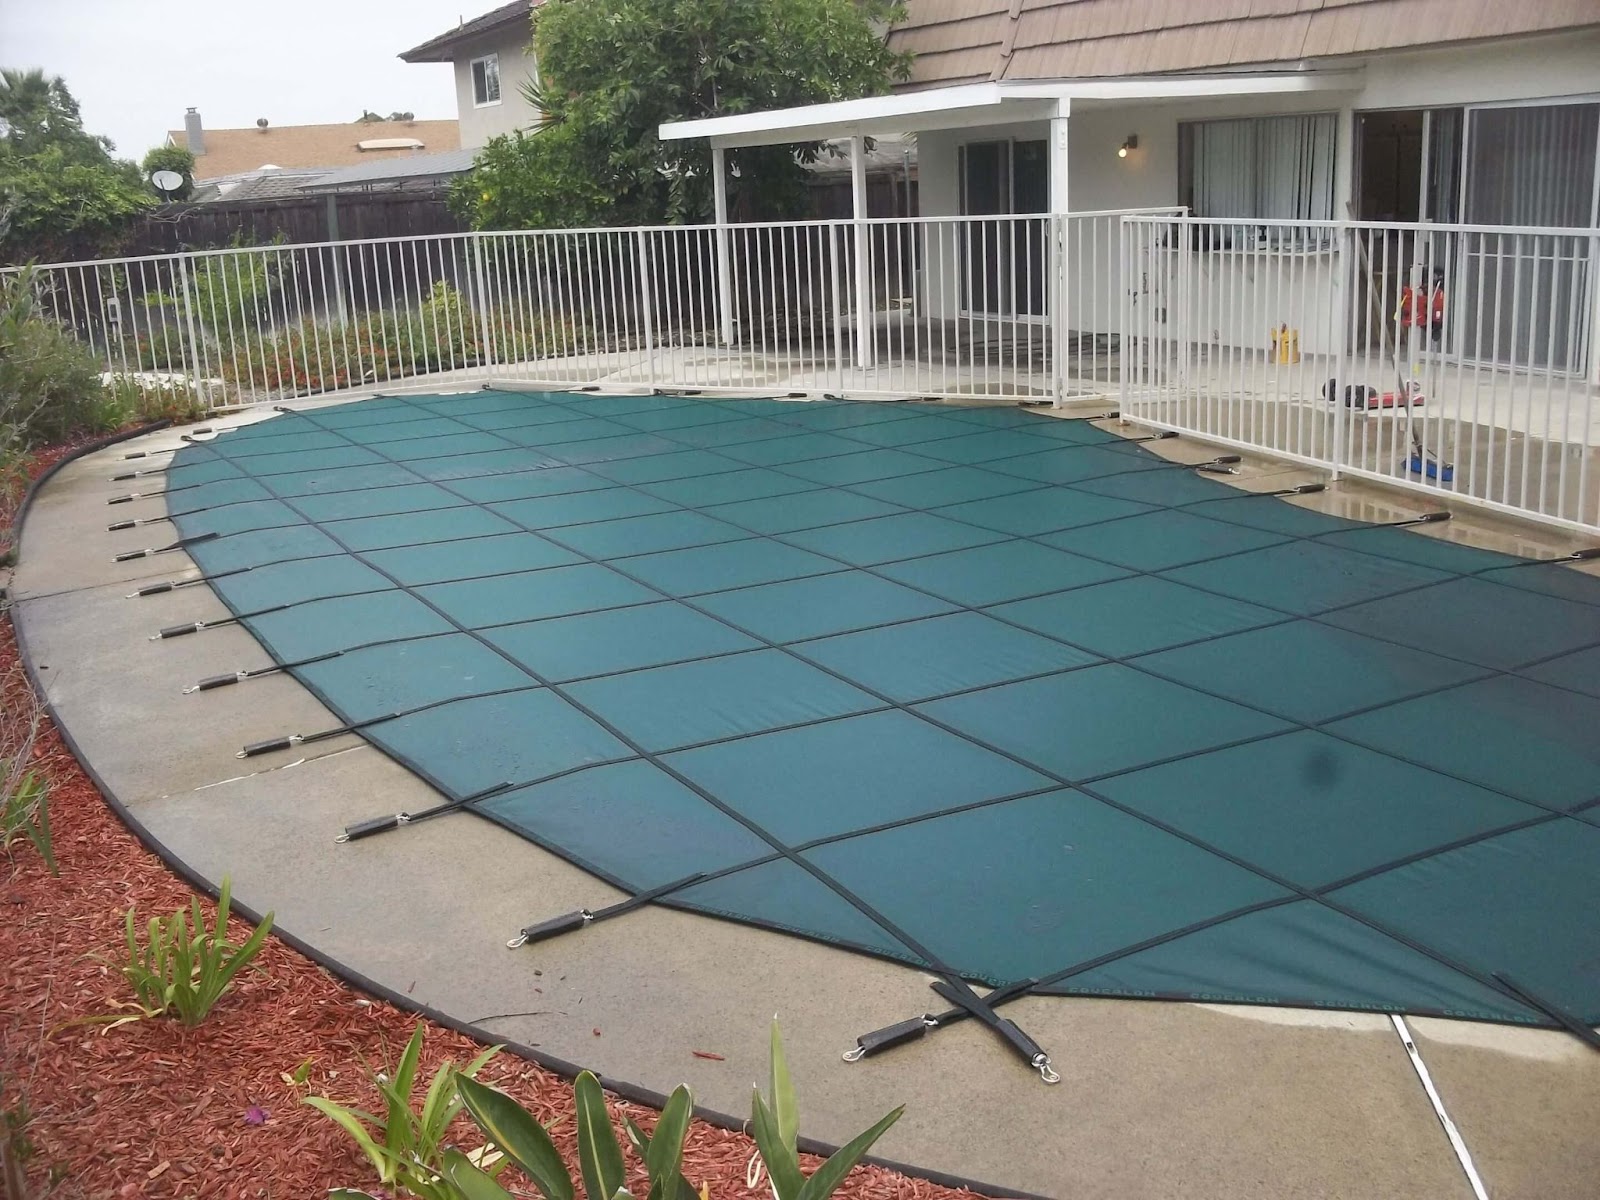 Green winter pool safety cover installed on an irregular pool